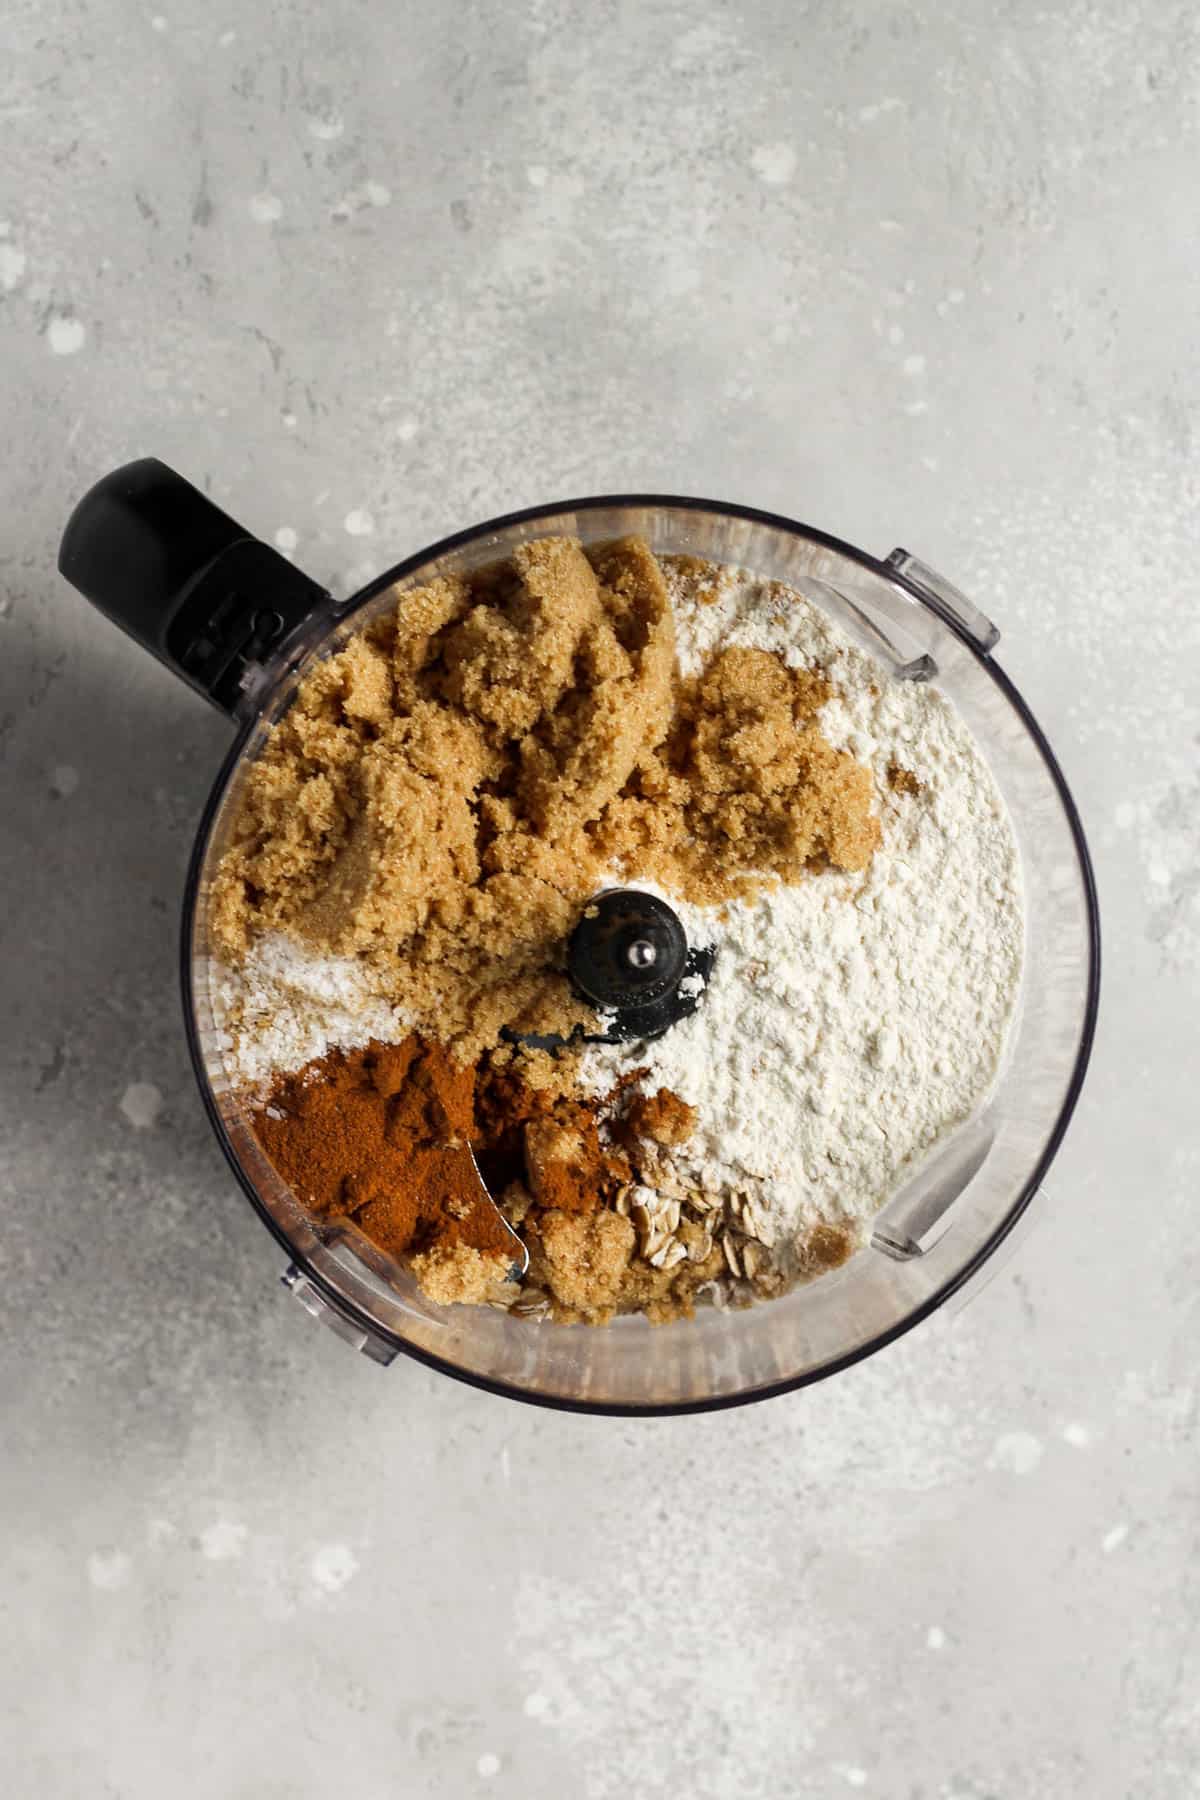 Crust and topping dry ingredients in a food processor.